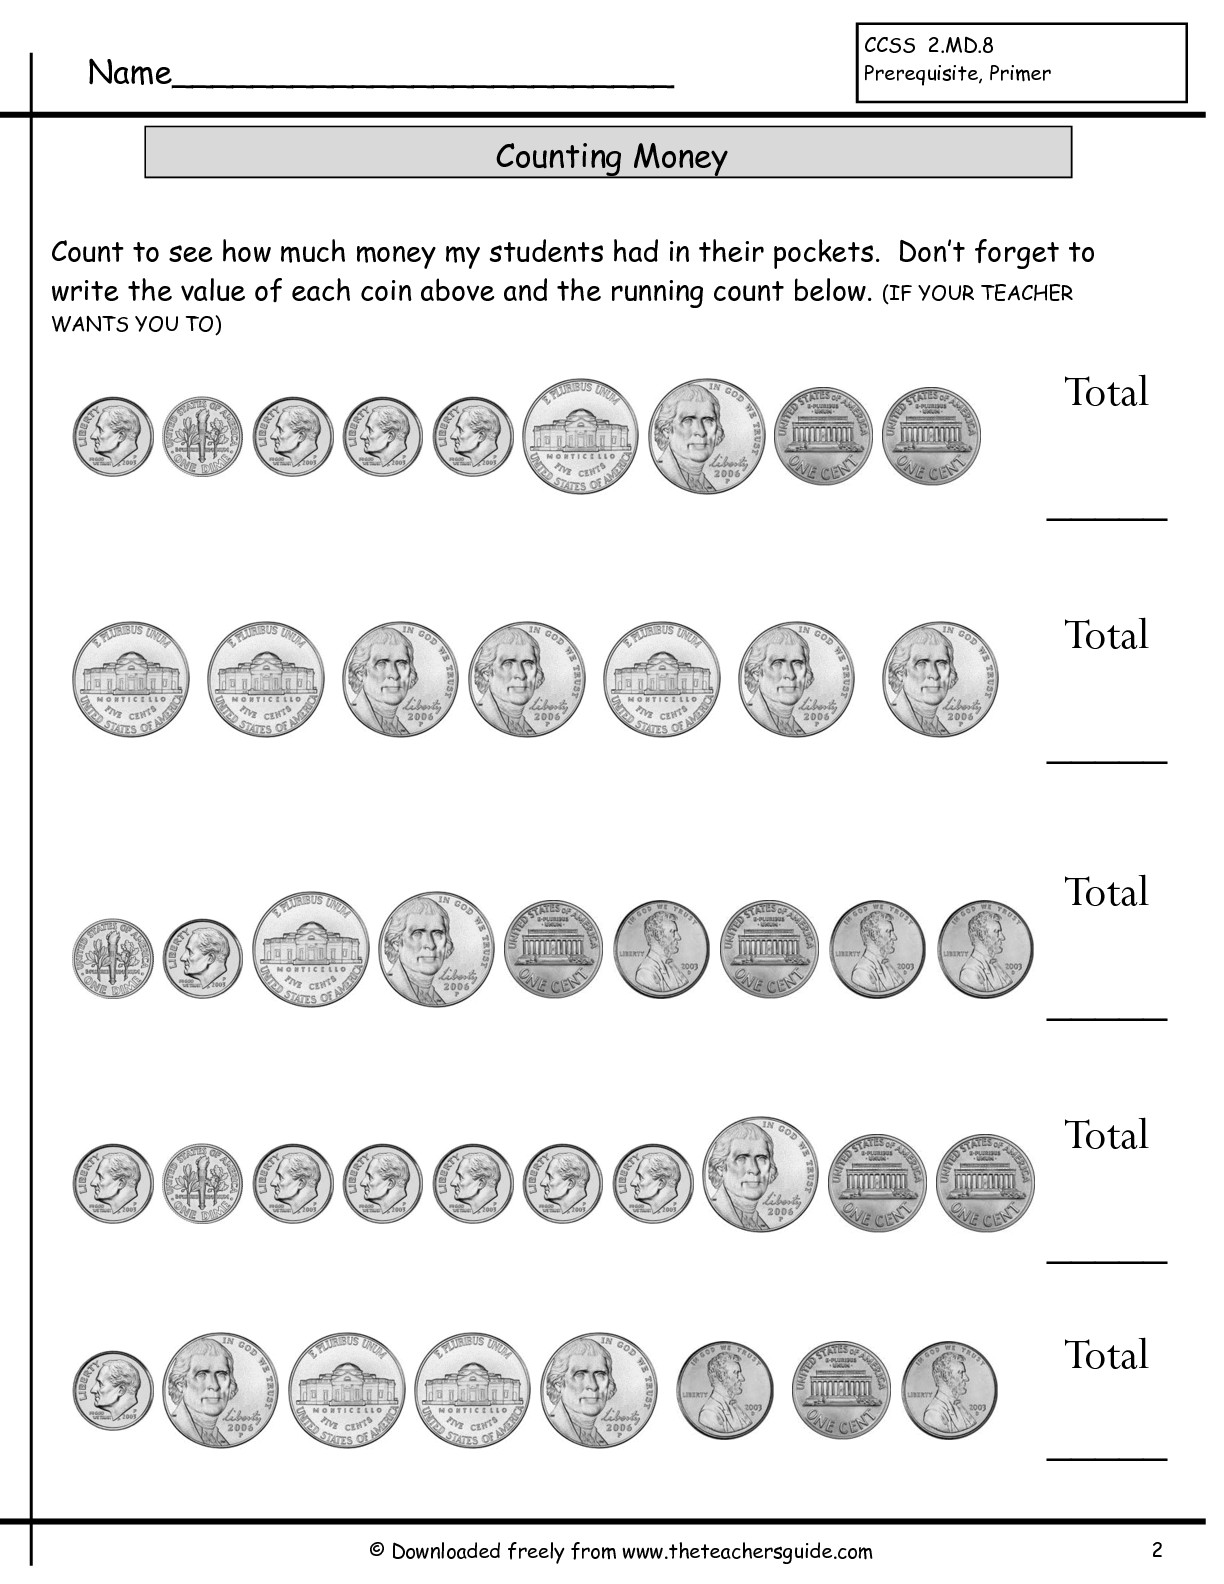 8-best-images-of-teaching-money-worksheets-coin-value-chart-worksheets-counting-coins